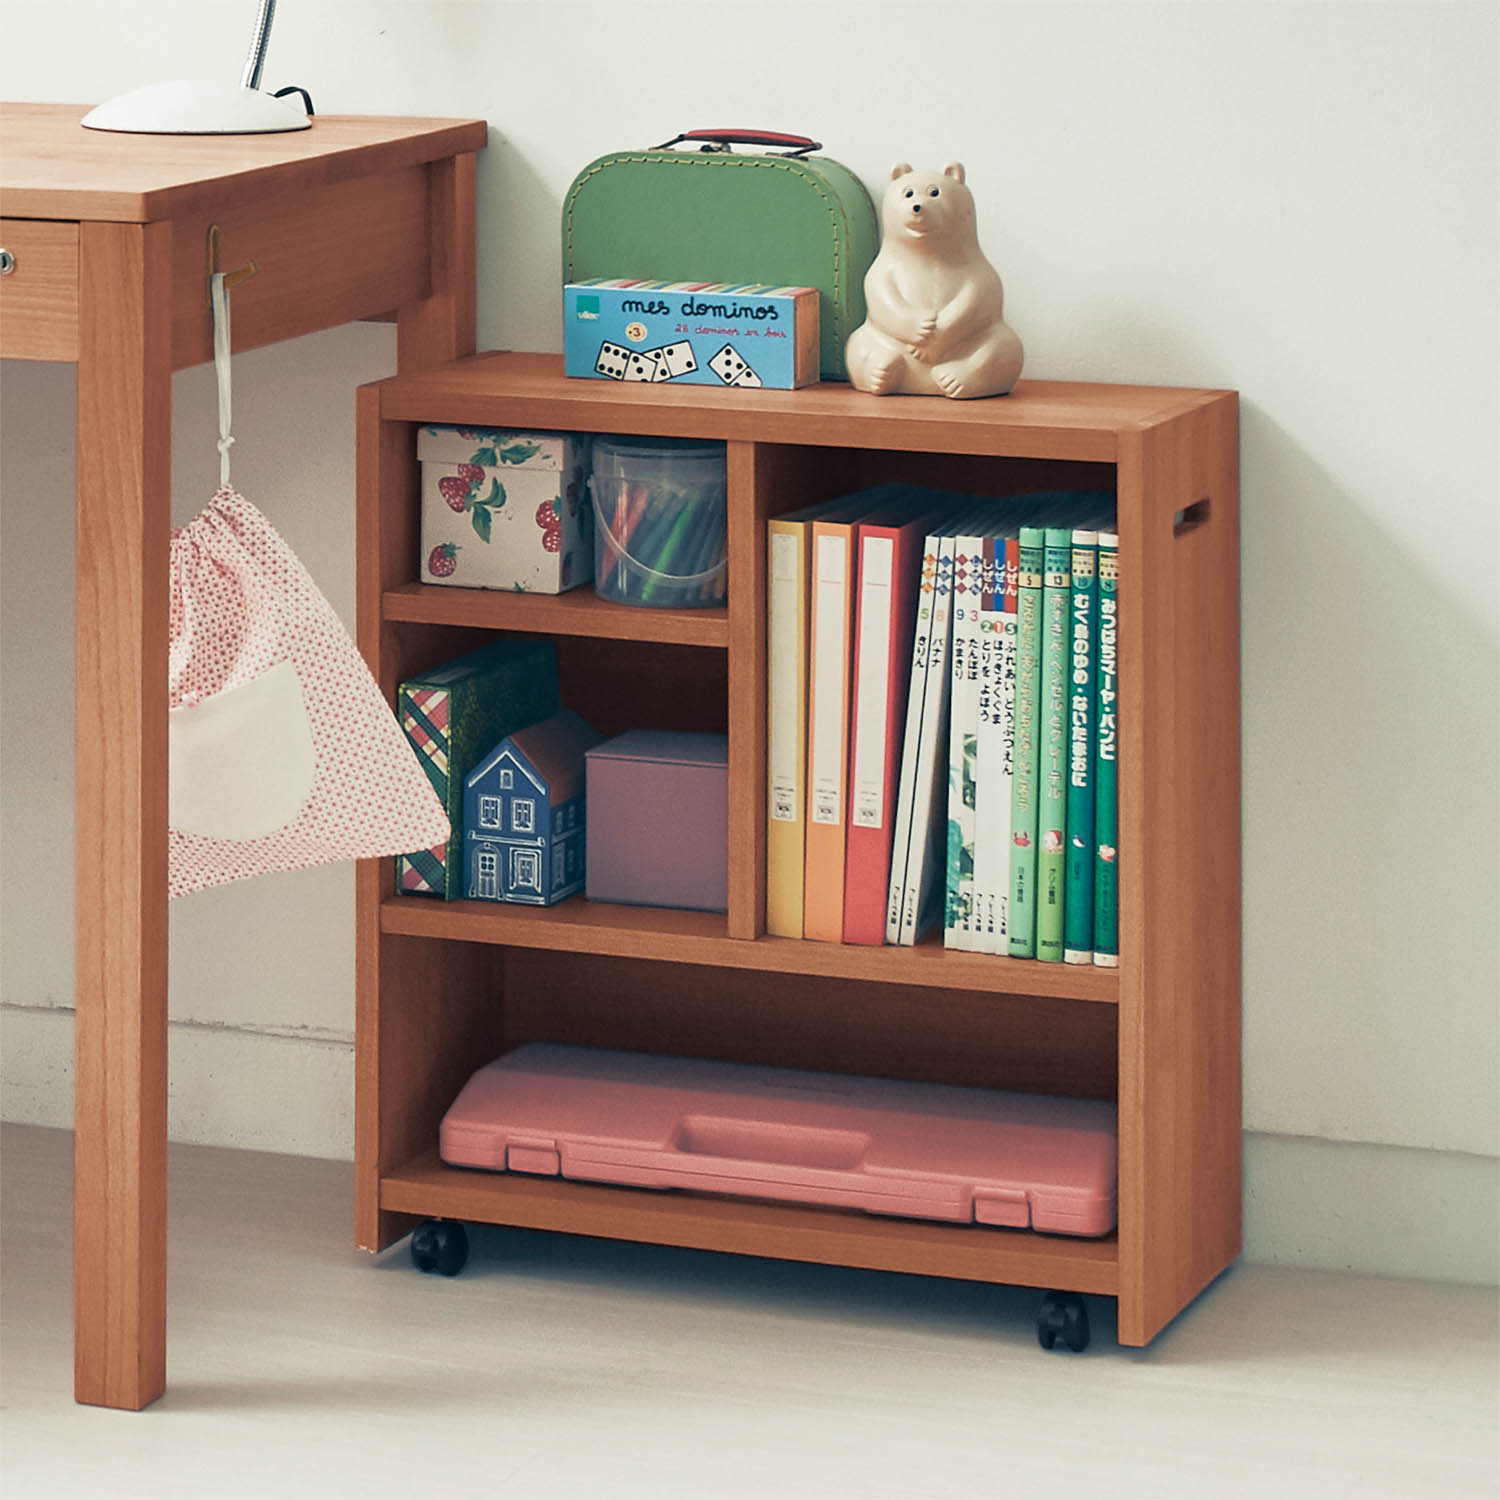  side Wagon Wagon shelves side chest chest furniture storage furniture study desk Manufacturers with casters . study desk under simple child part shop made in Japan stylish new life 